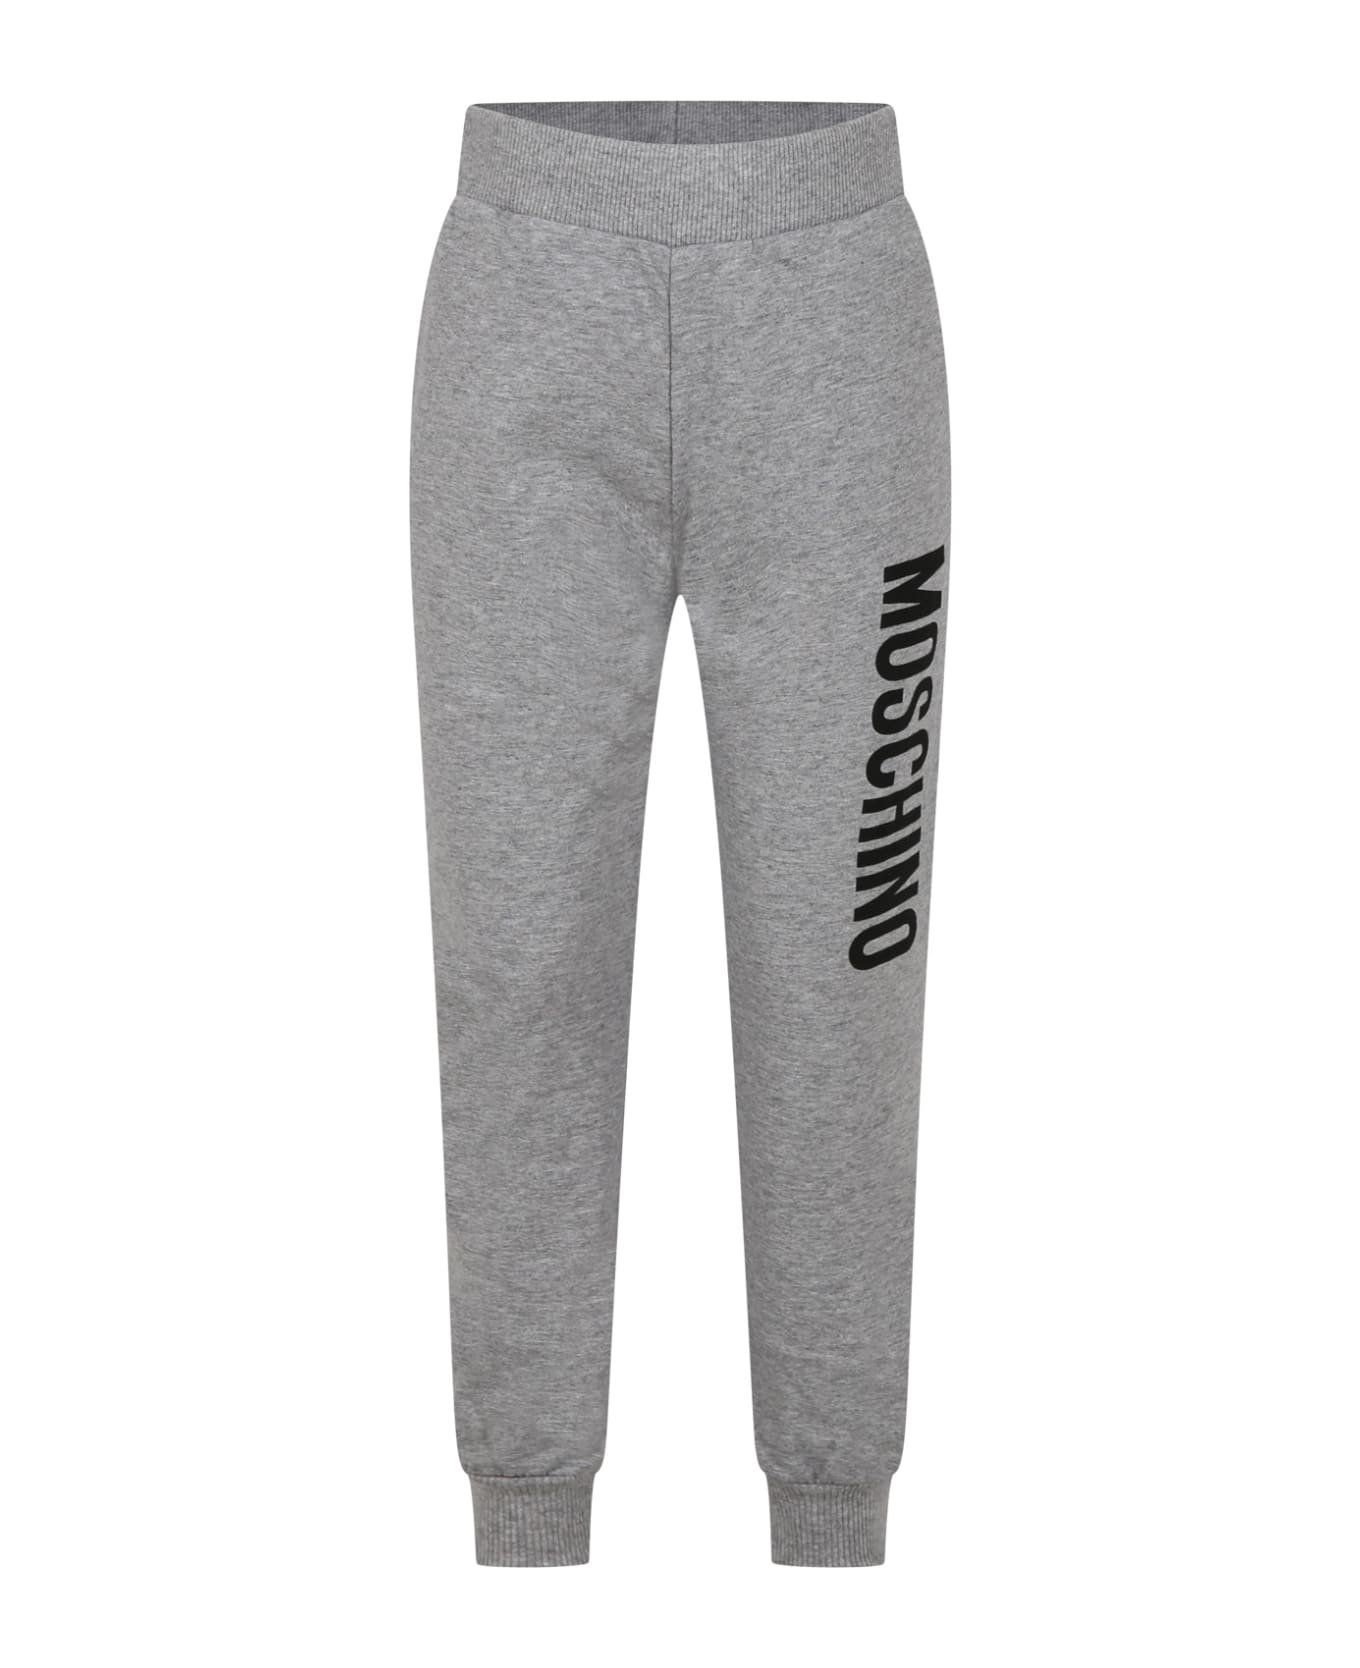 Moschino Grey Trousers For Kids With Logo - Grey